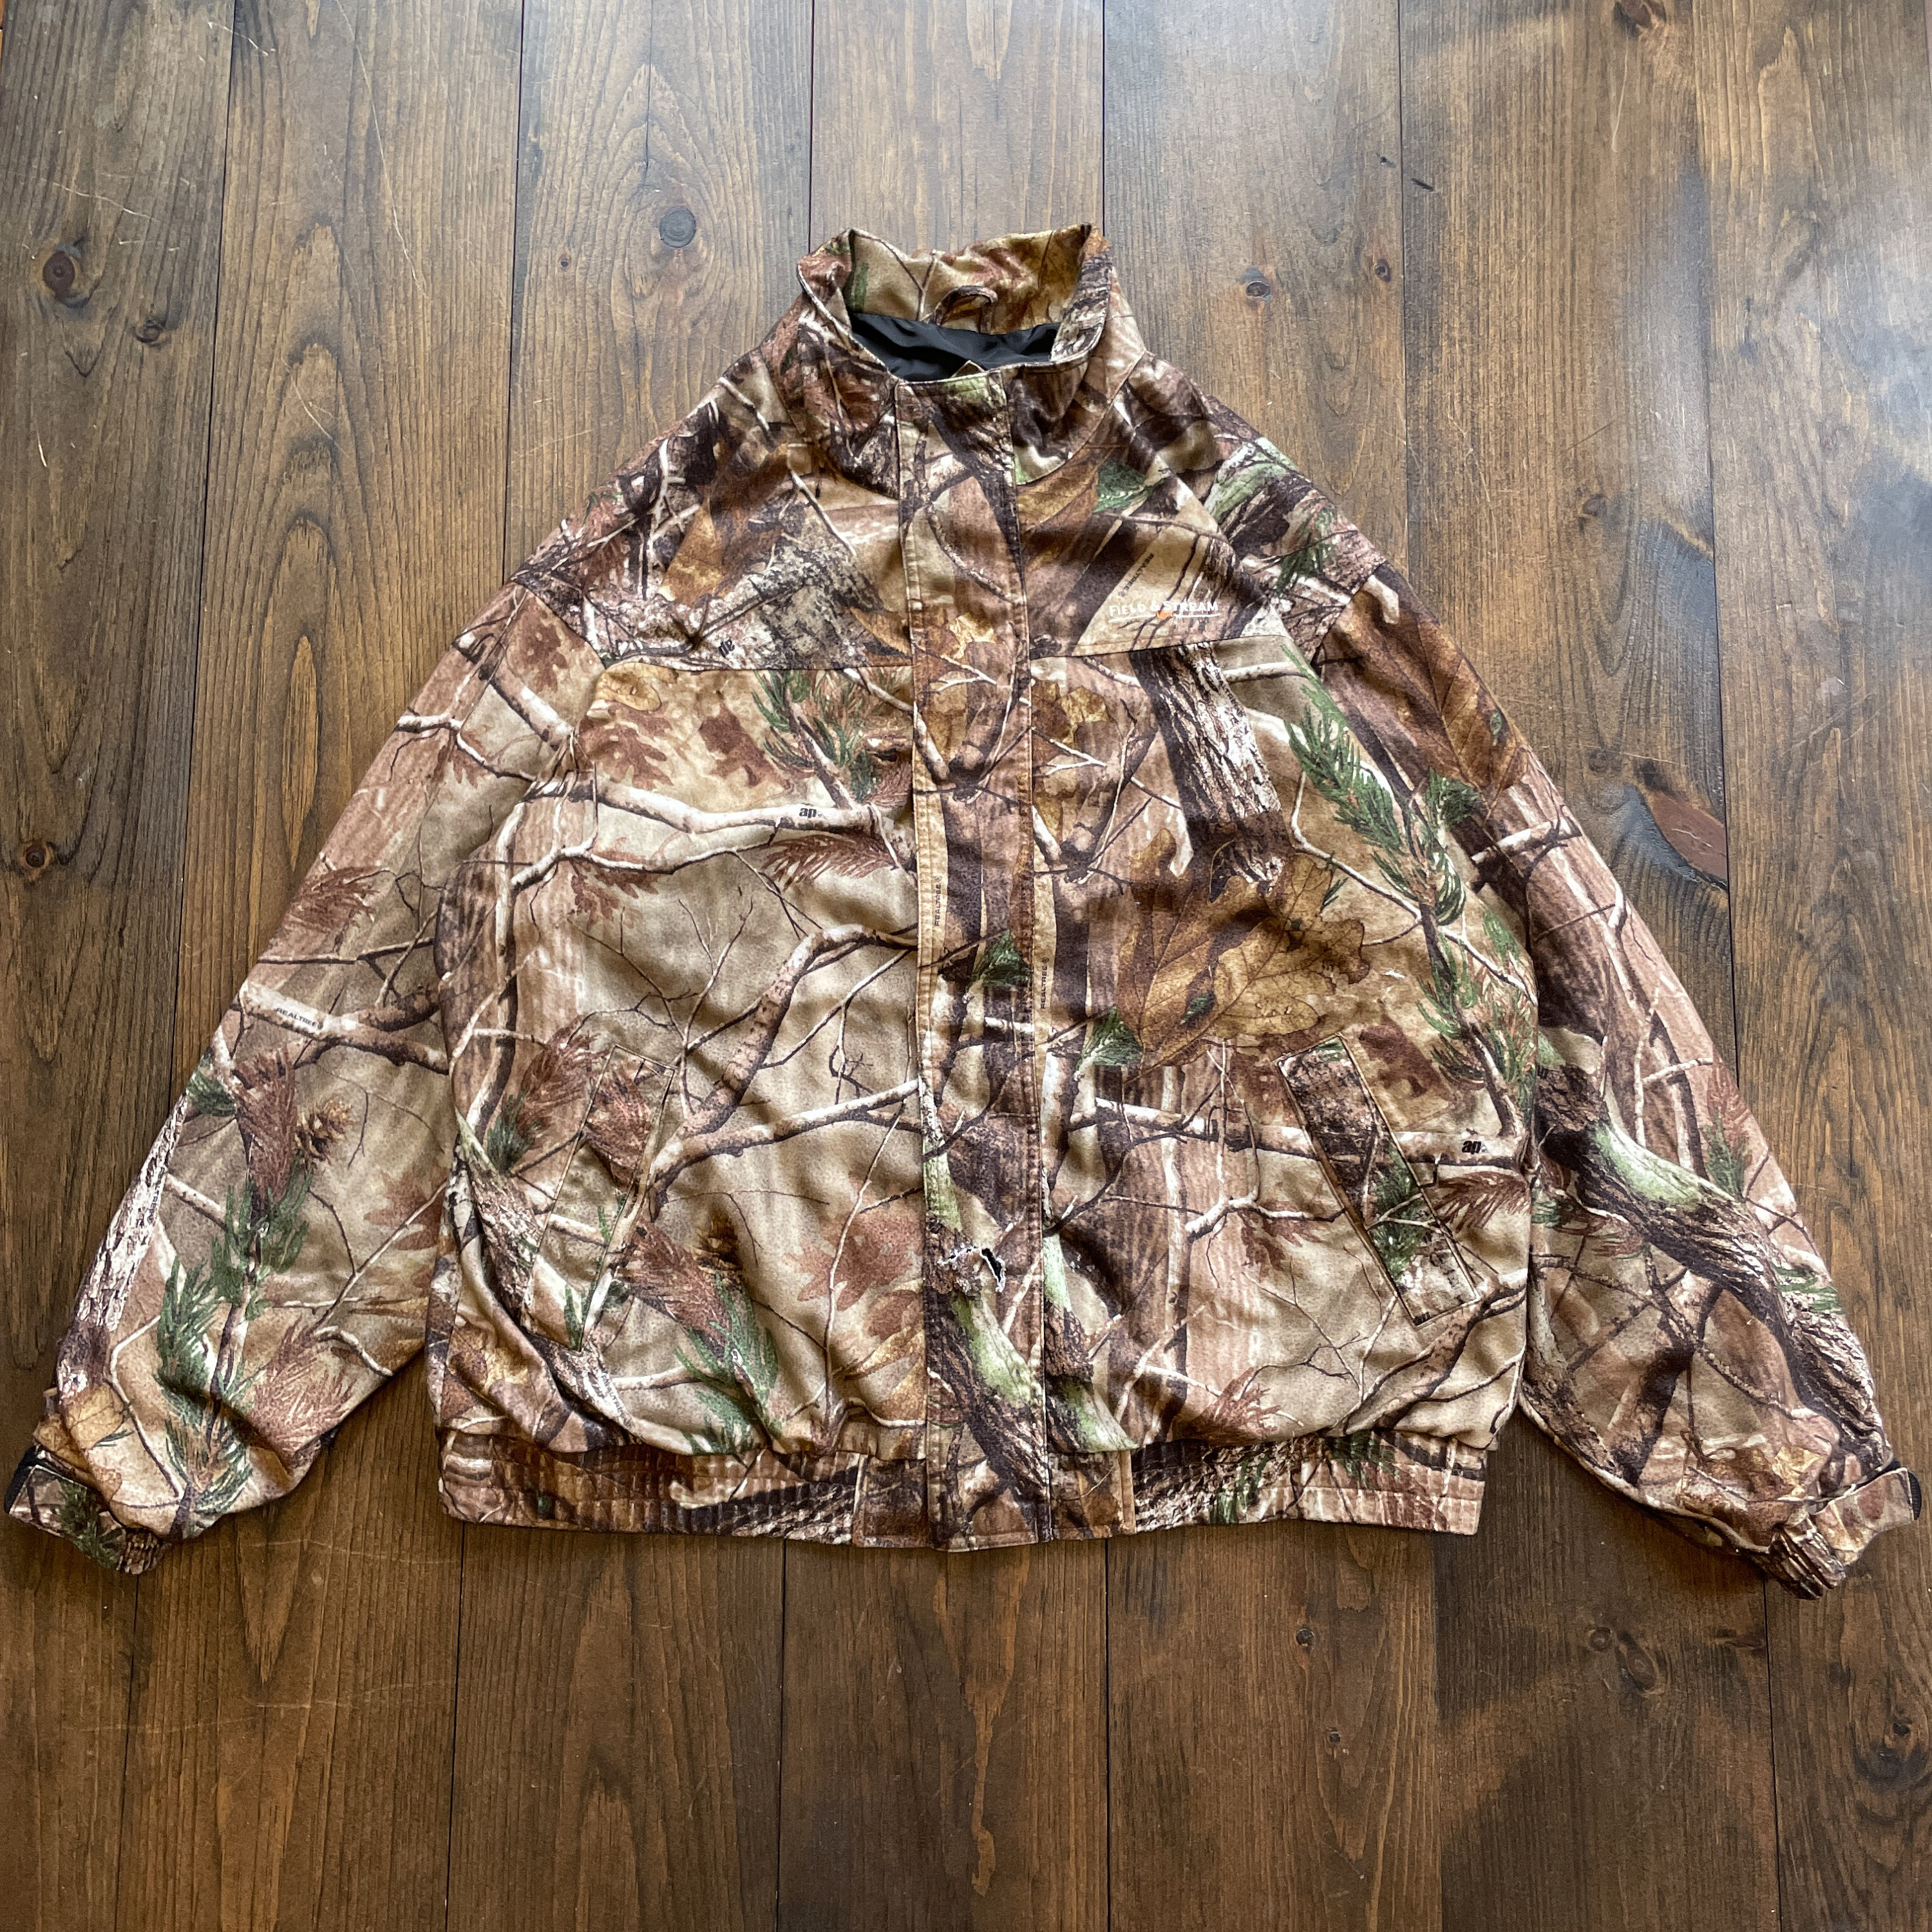 How Realtree Camouflage Became a Cool-Kid Essential